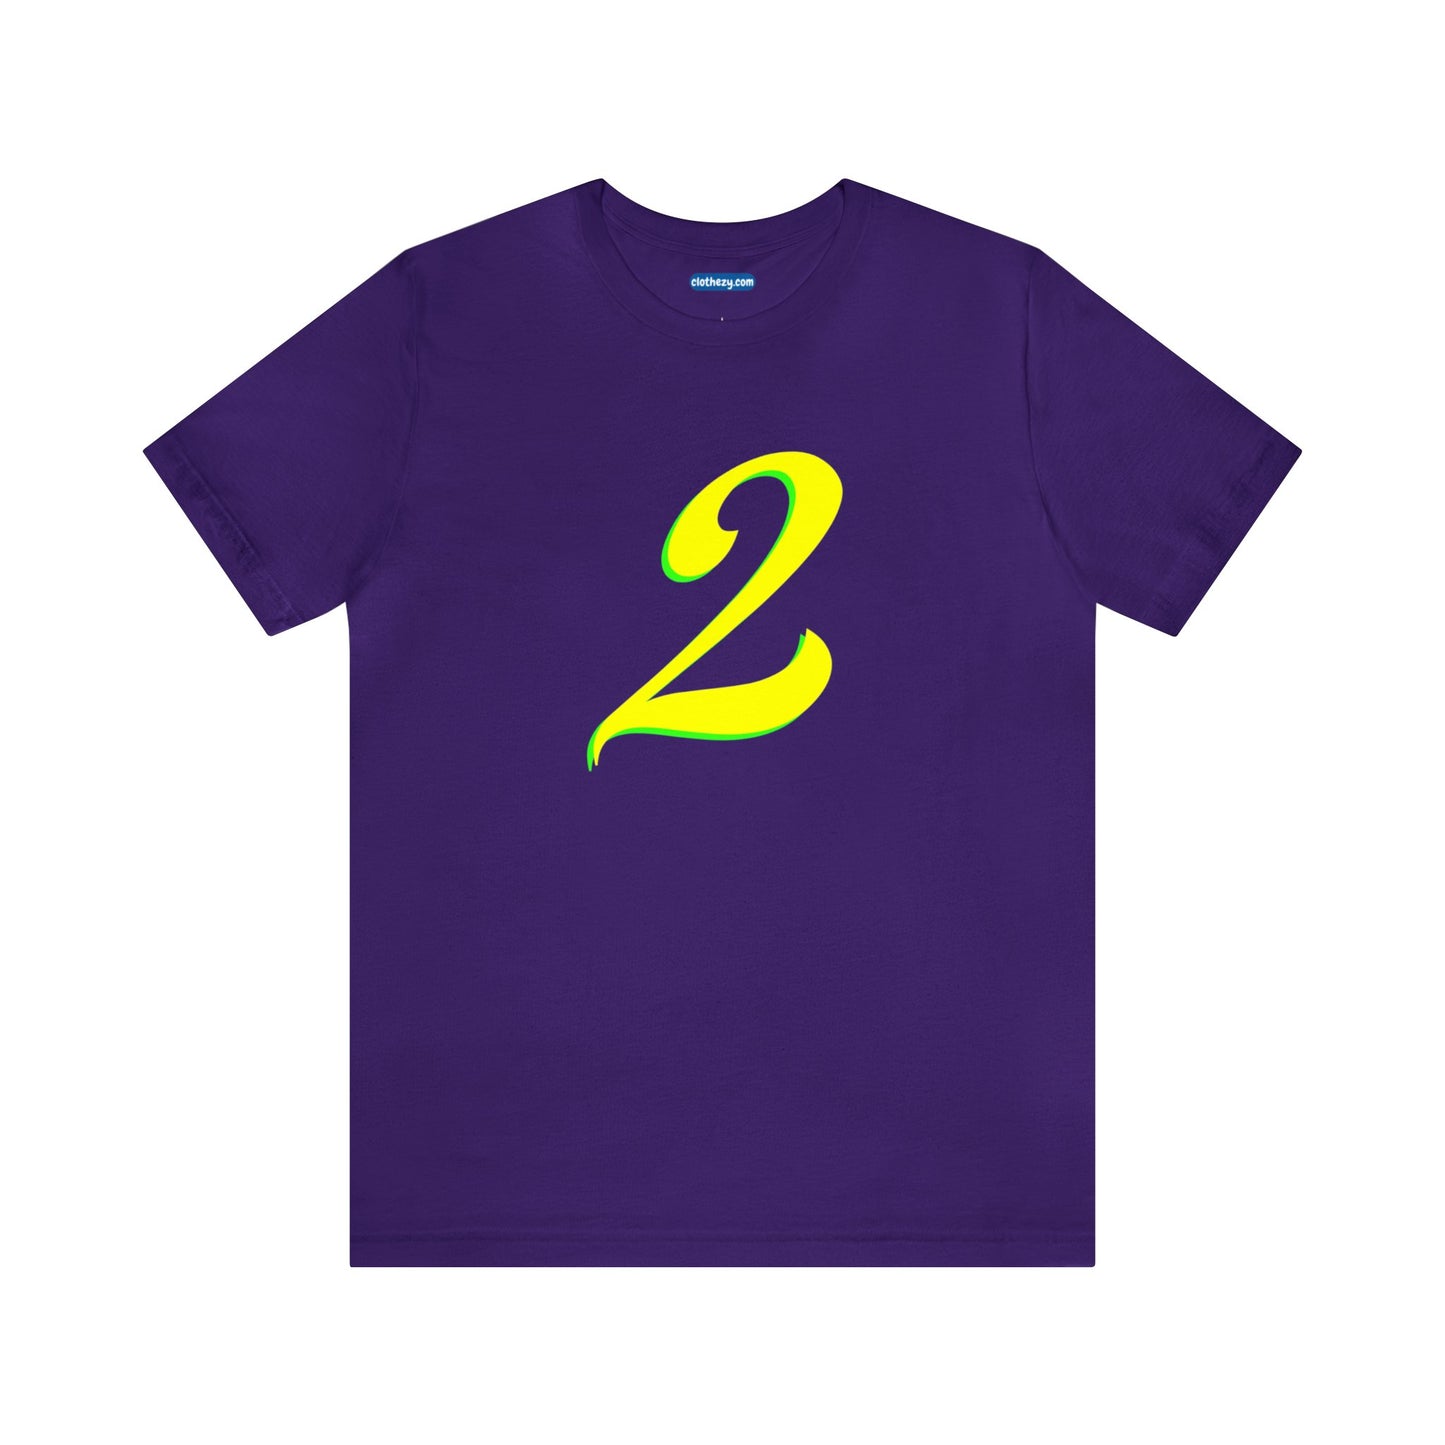 Number 2 Design - Soft Cotton Tee for birthdays and celebrations, Gift for friends and family, Multiple Options by clothezy.com in Royal Blue Size Small - Buy Now